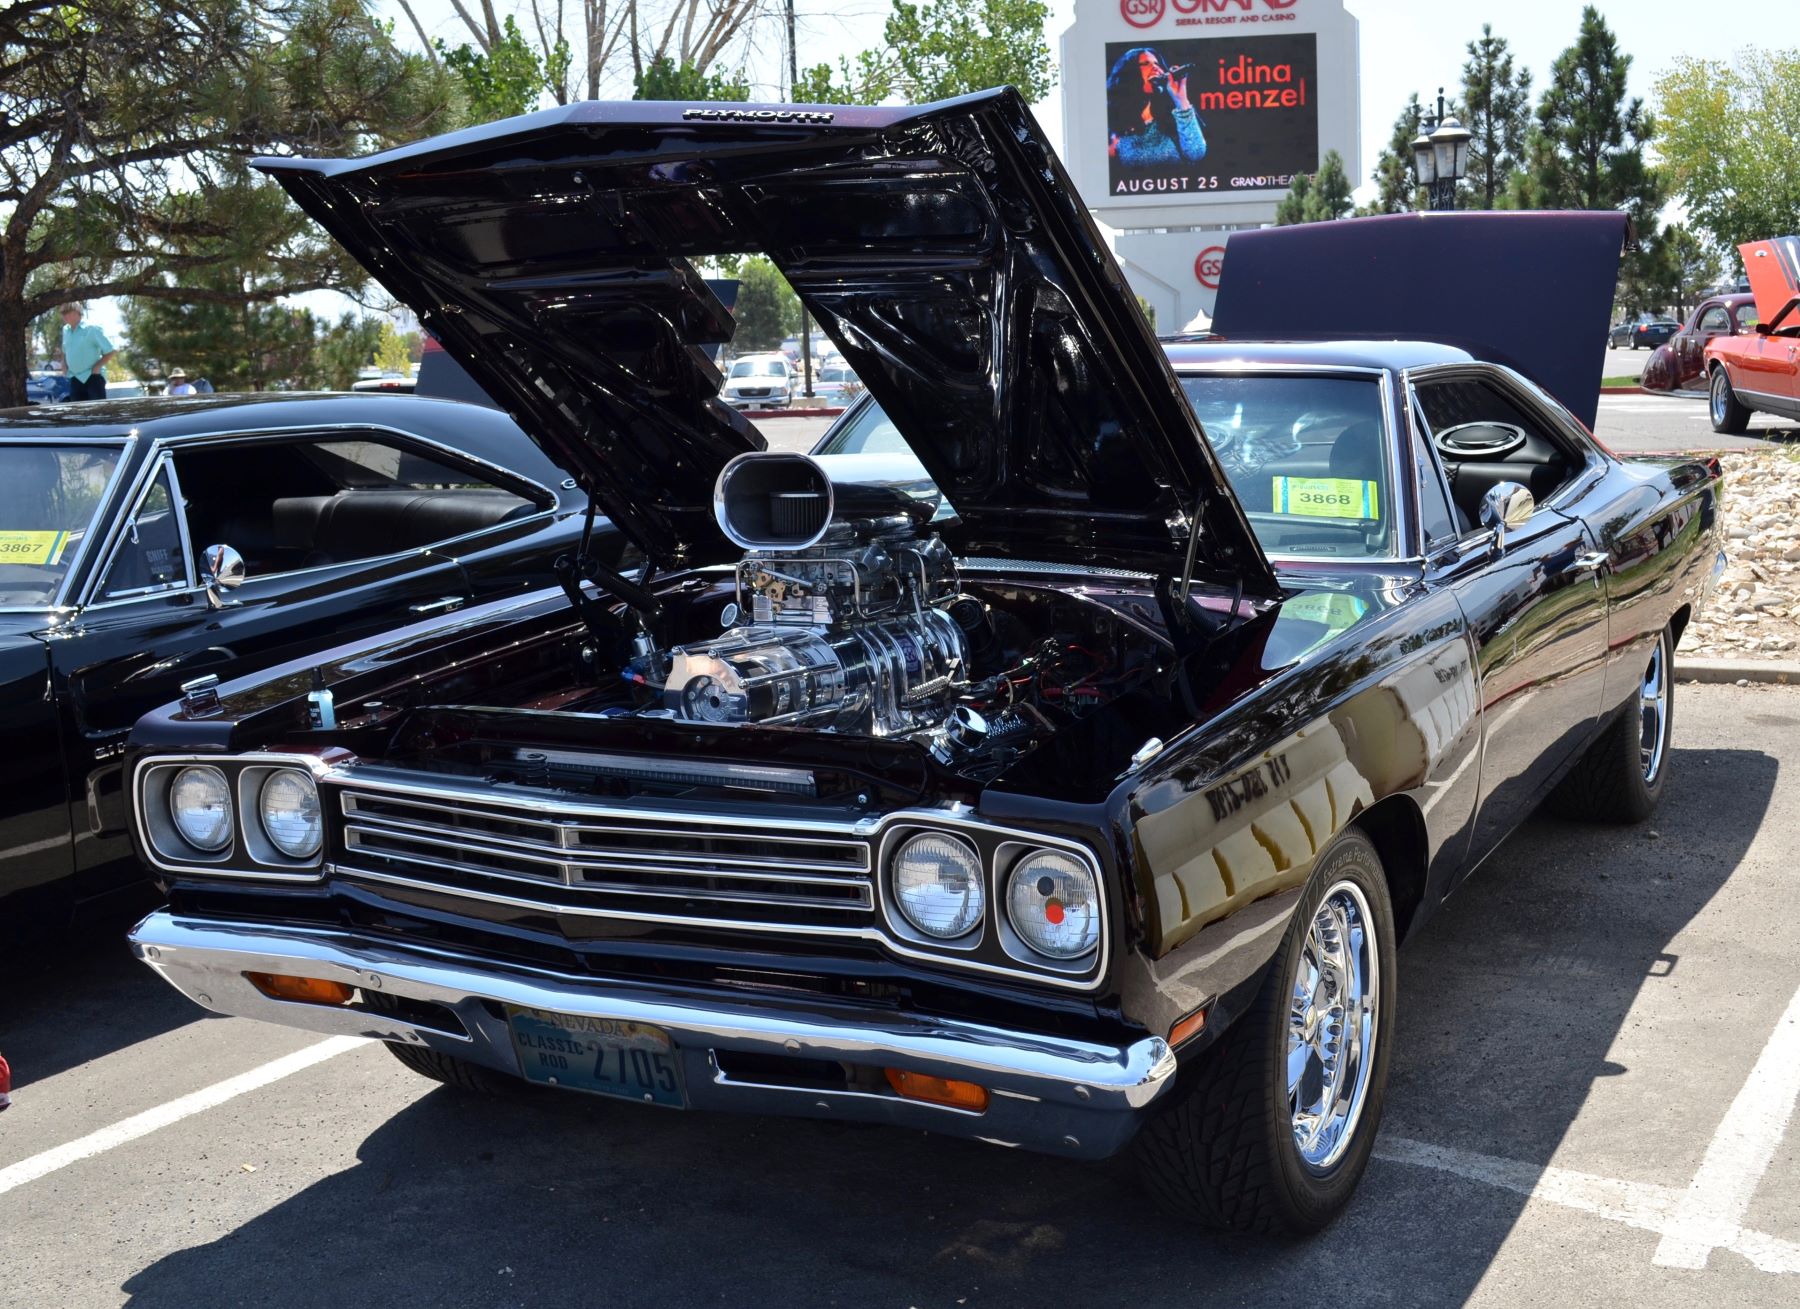 A 1969 Plymouth Road Runner with a V8 engine on display at Hot August Nights Custom Car Show in Reno, Nevada